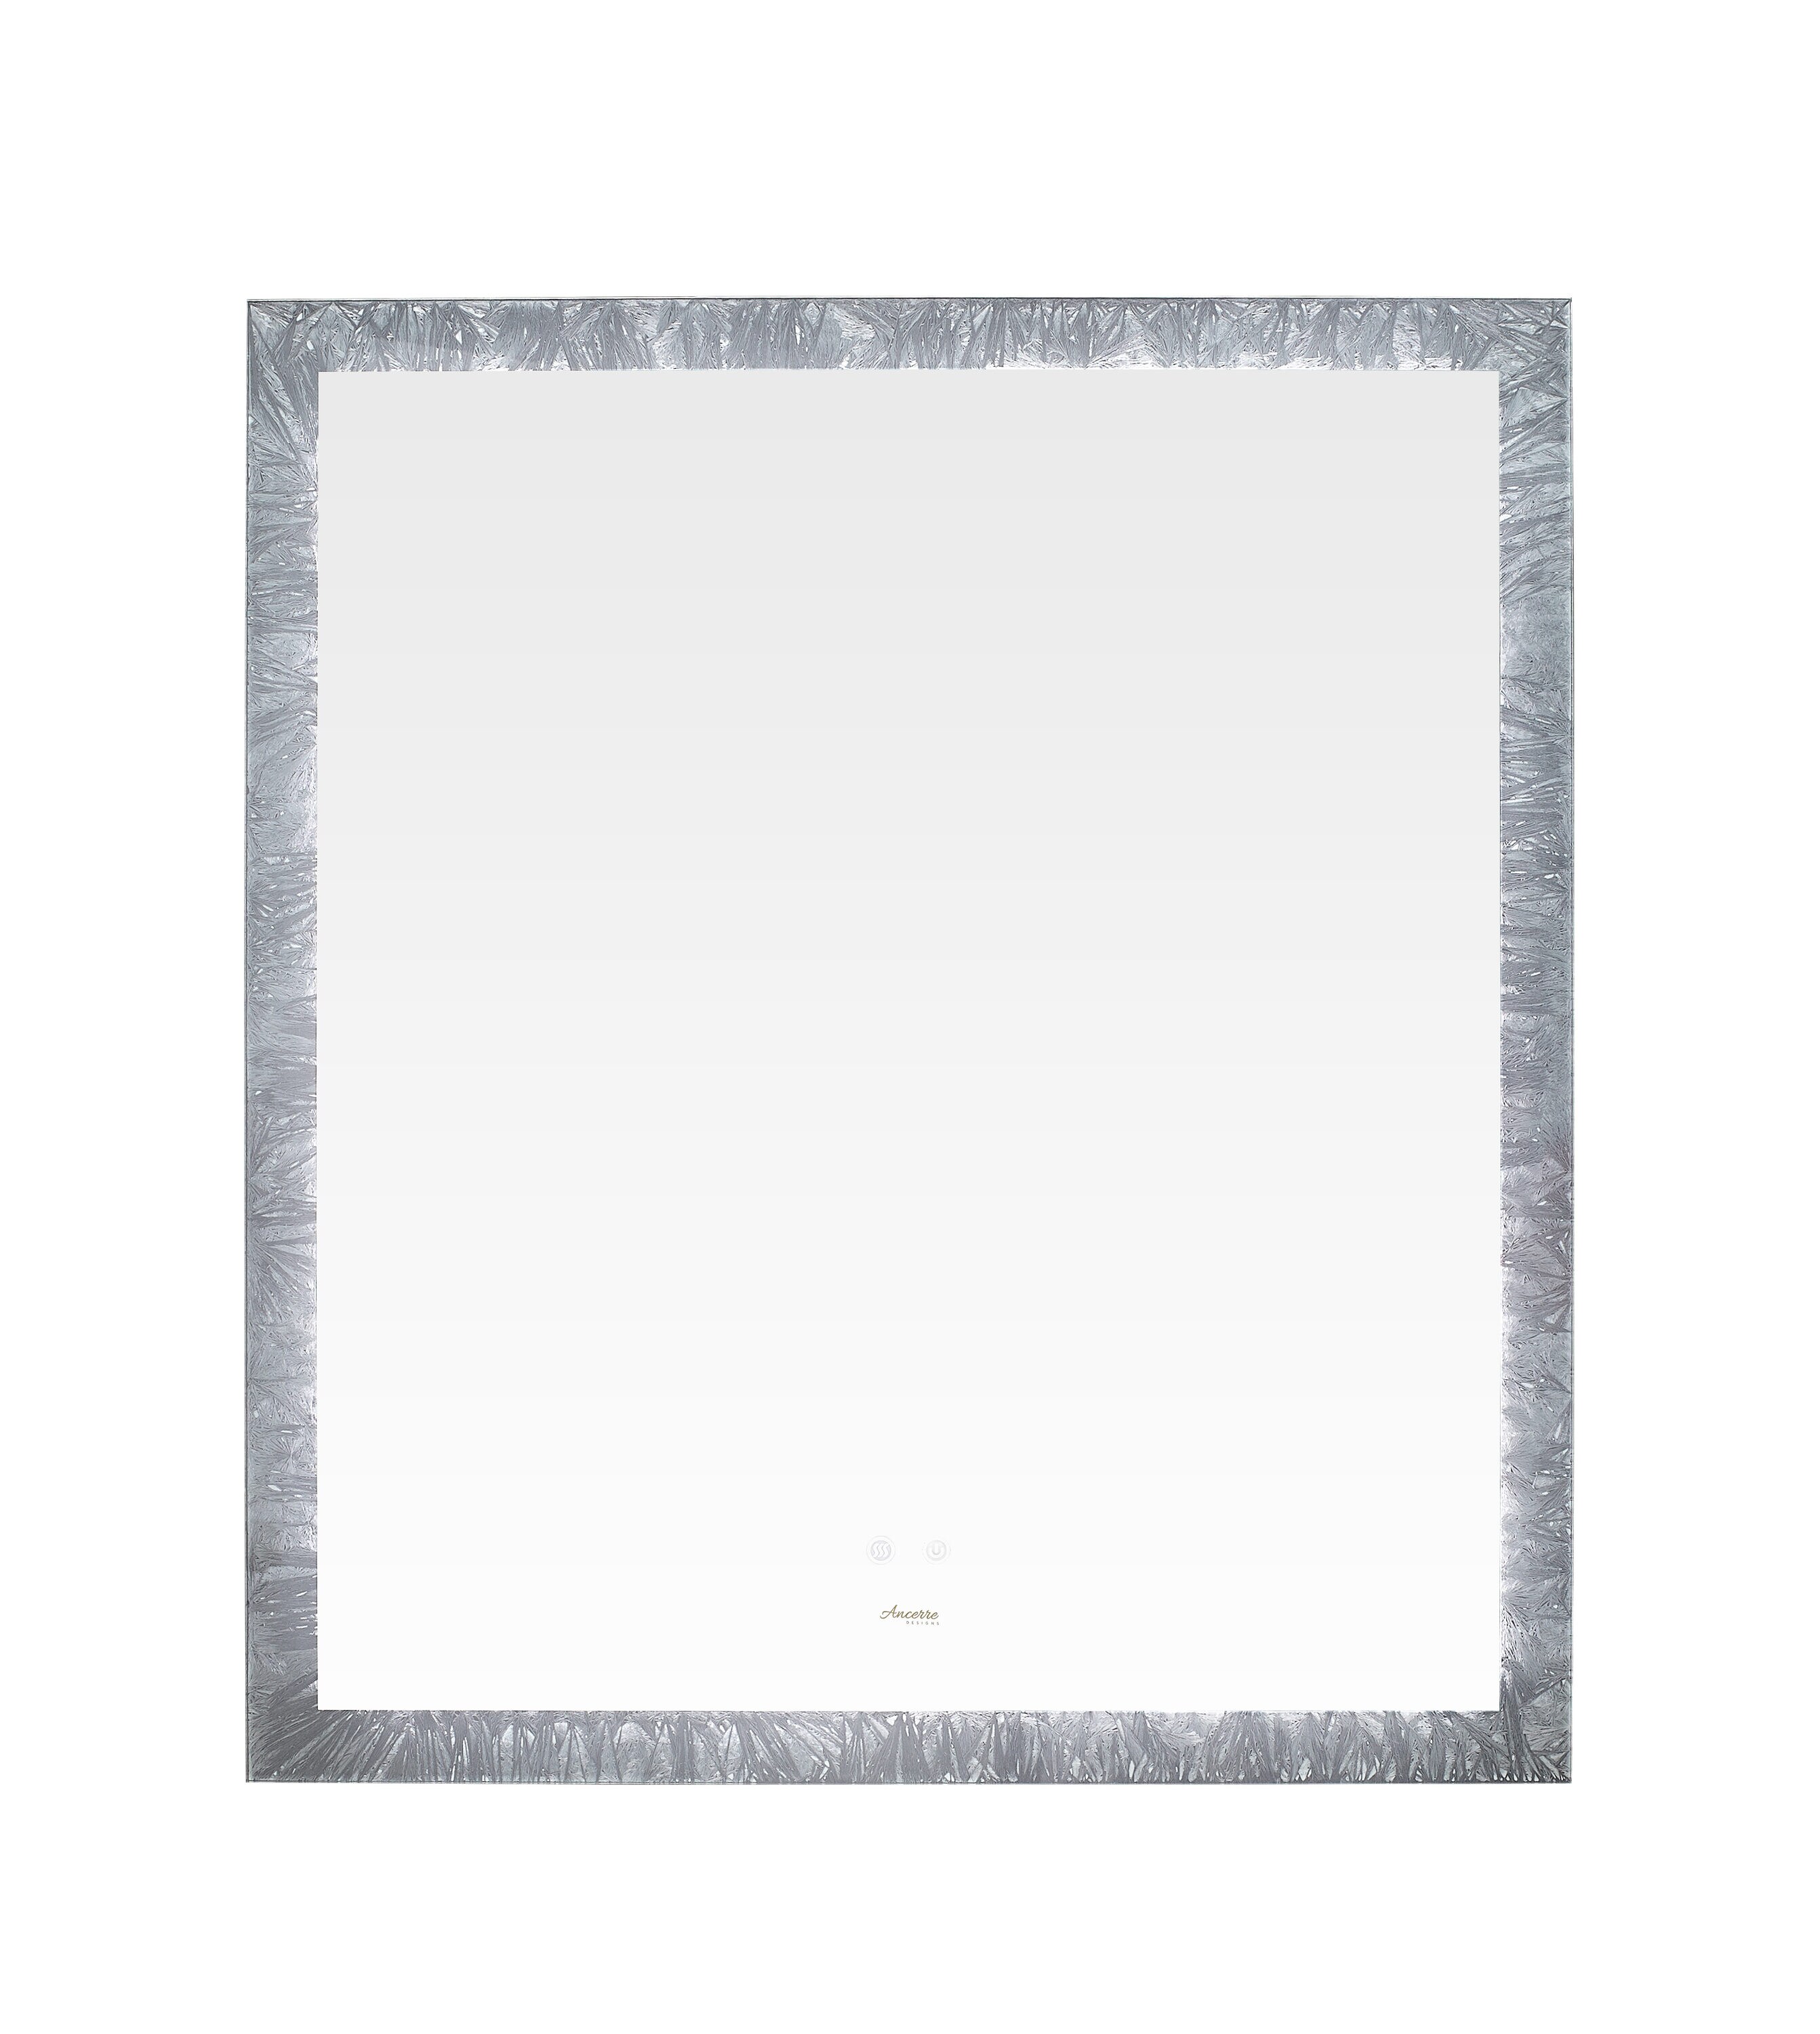 Ancerre Designs Immersion LED Frameless Mirror with Bluetooth, Defogger and Digital Display, 24 in. x 40 in.